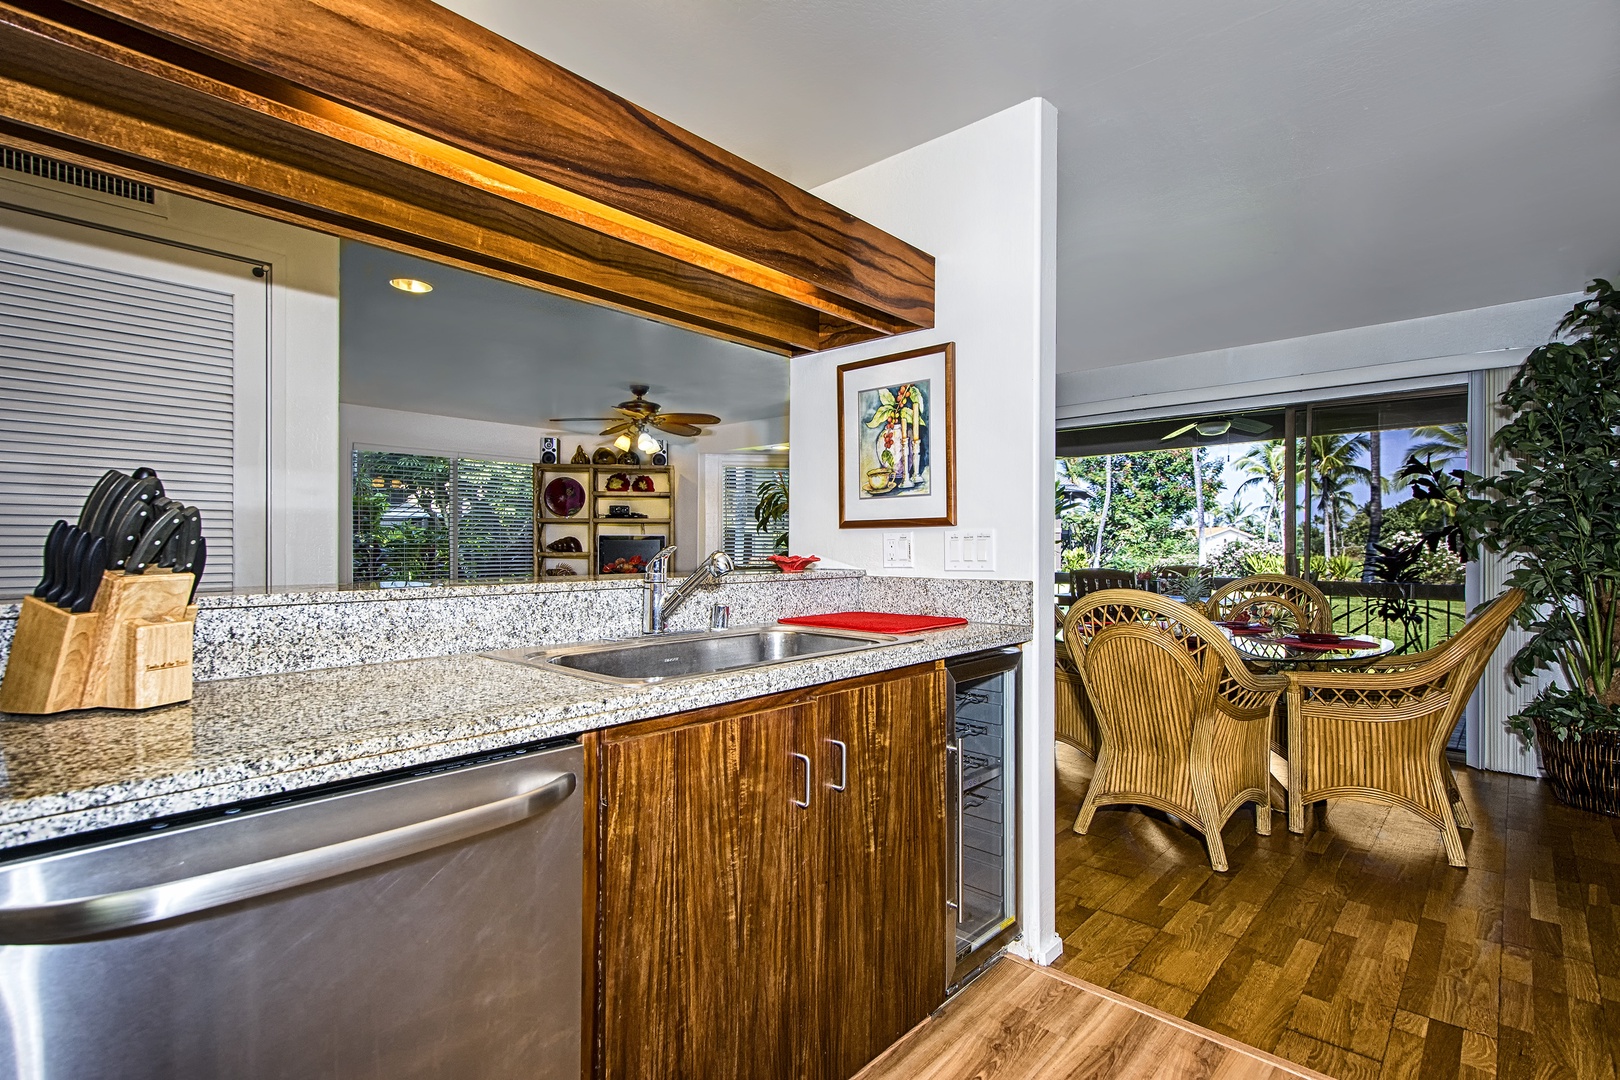 Kailua Kona Vacation Rentals, Kanaloa 701 - Enjoy cooking a meal in the fully equipped kitchen, which features a breakfast bar with seating for three